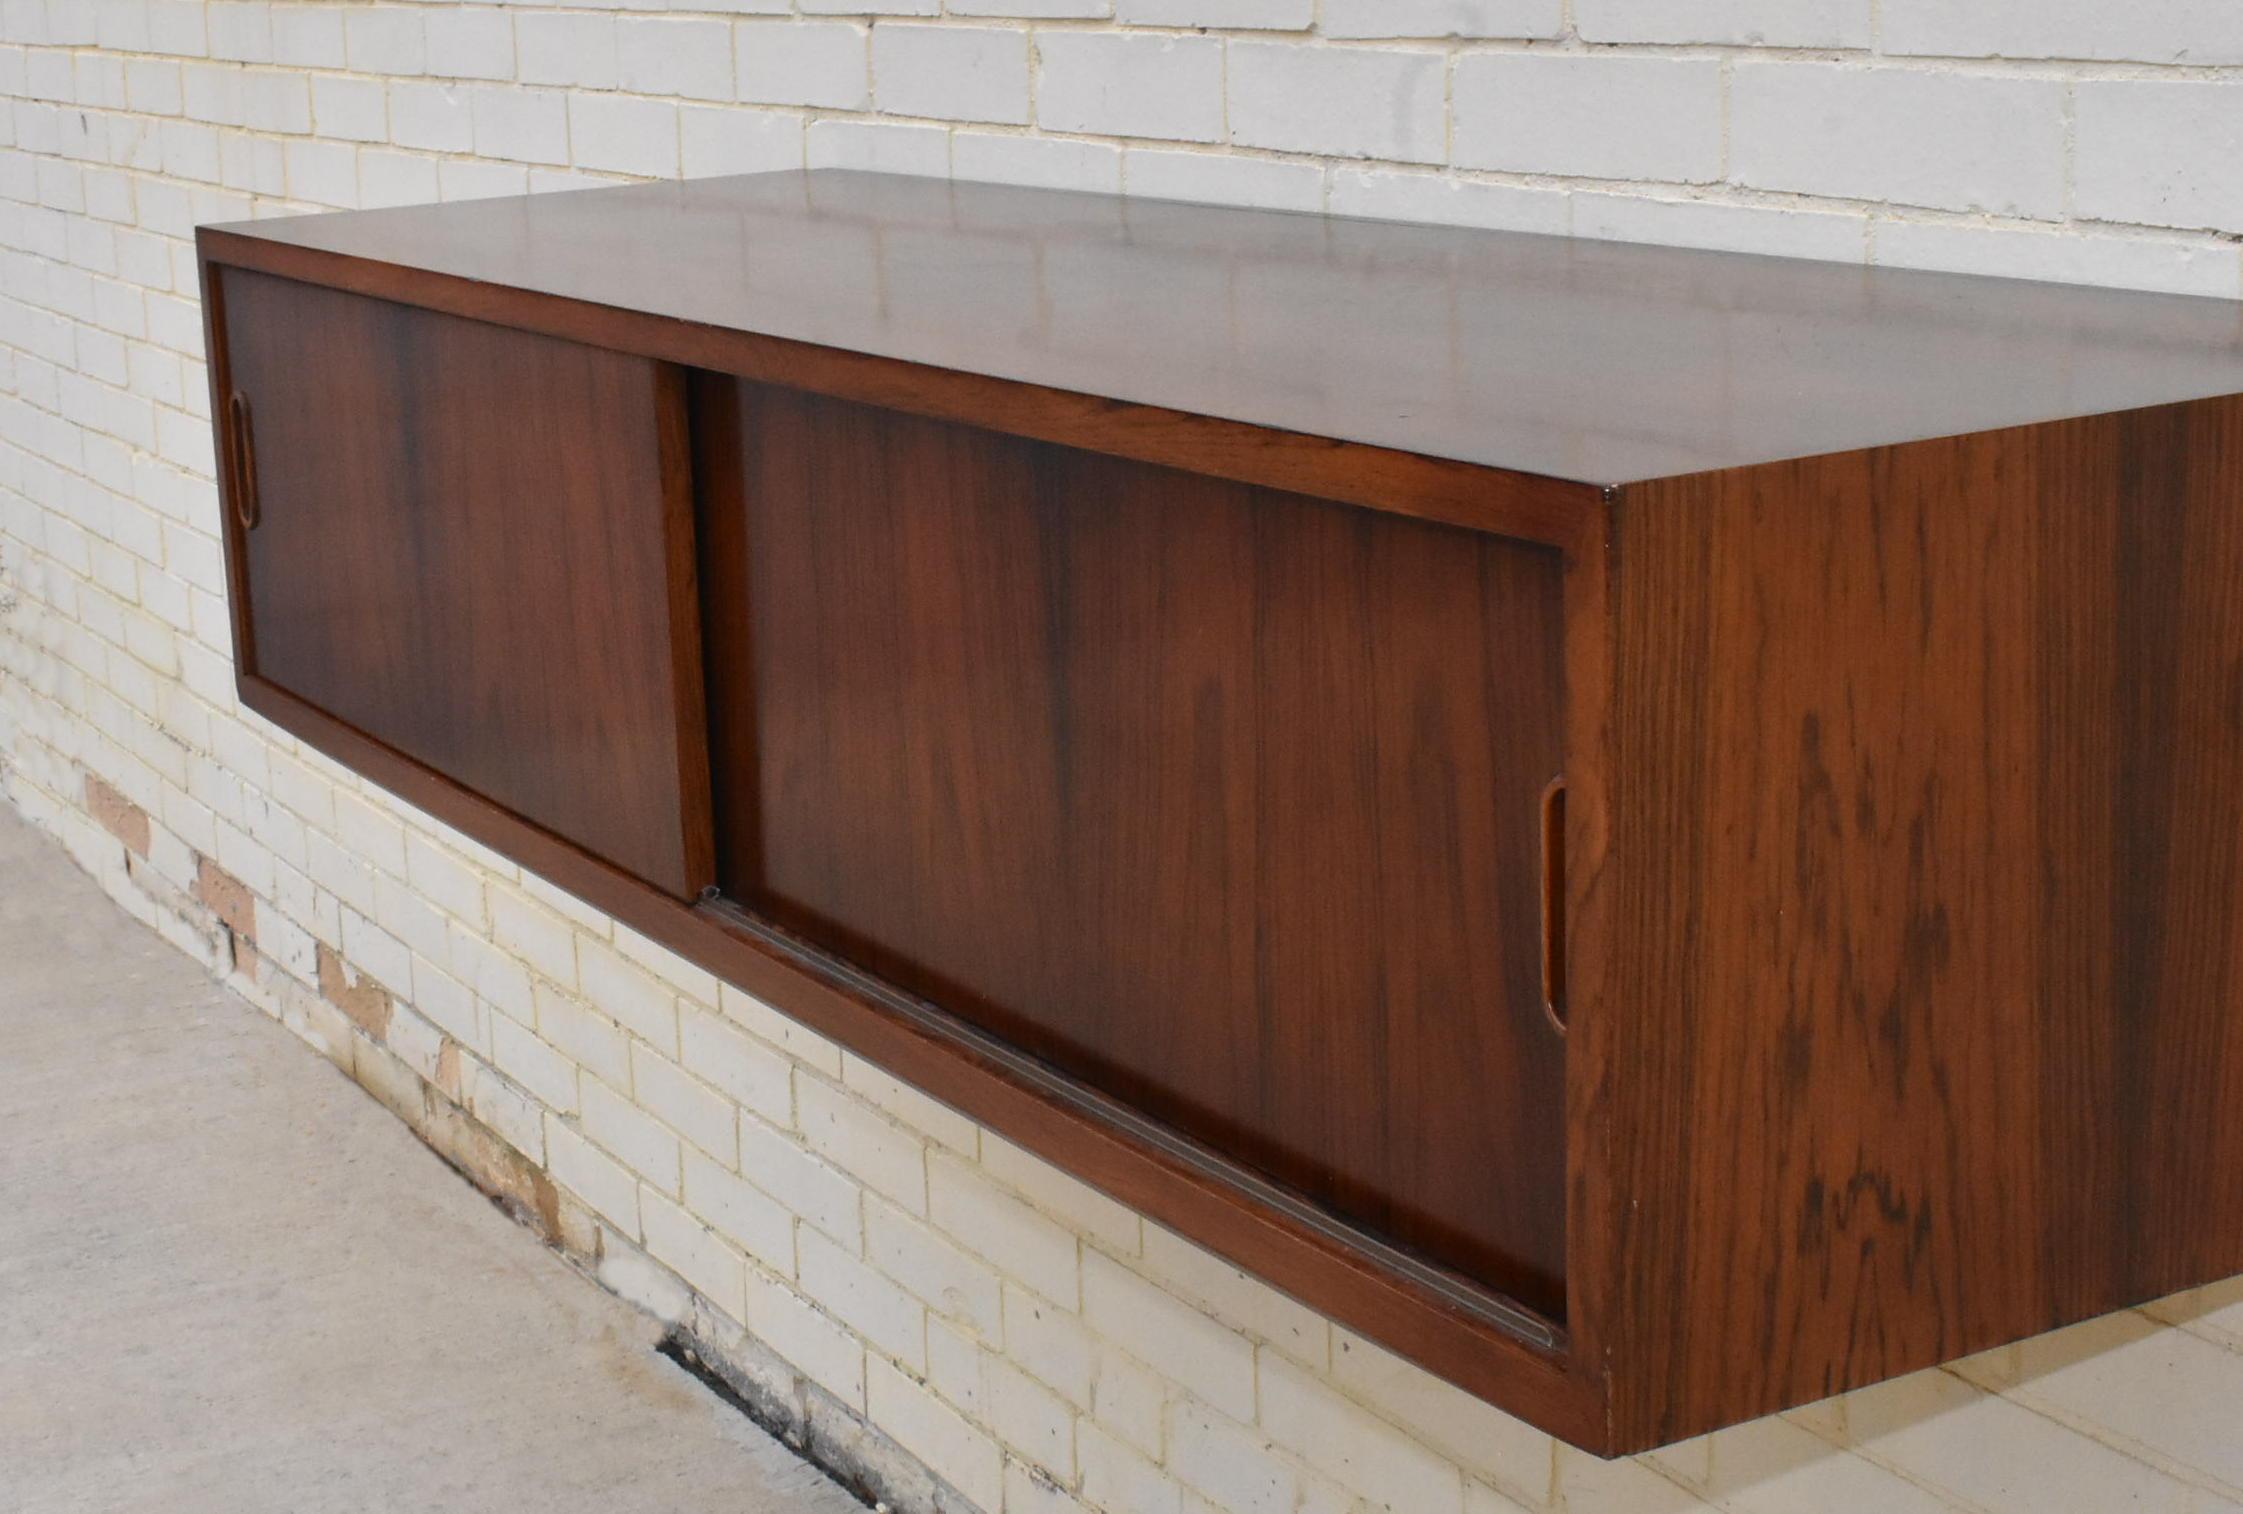 Modern rosewood Danish hanging wall credenza. Two sliding doors with wood pulls. Dimensions are 17.5